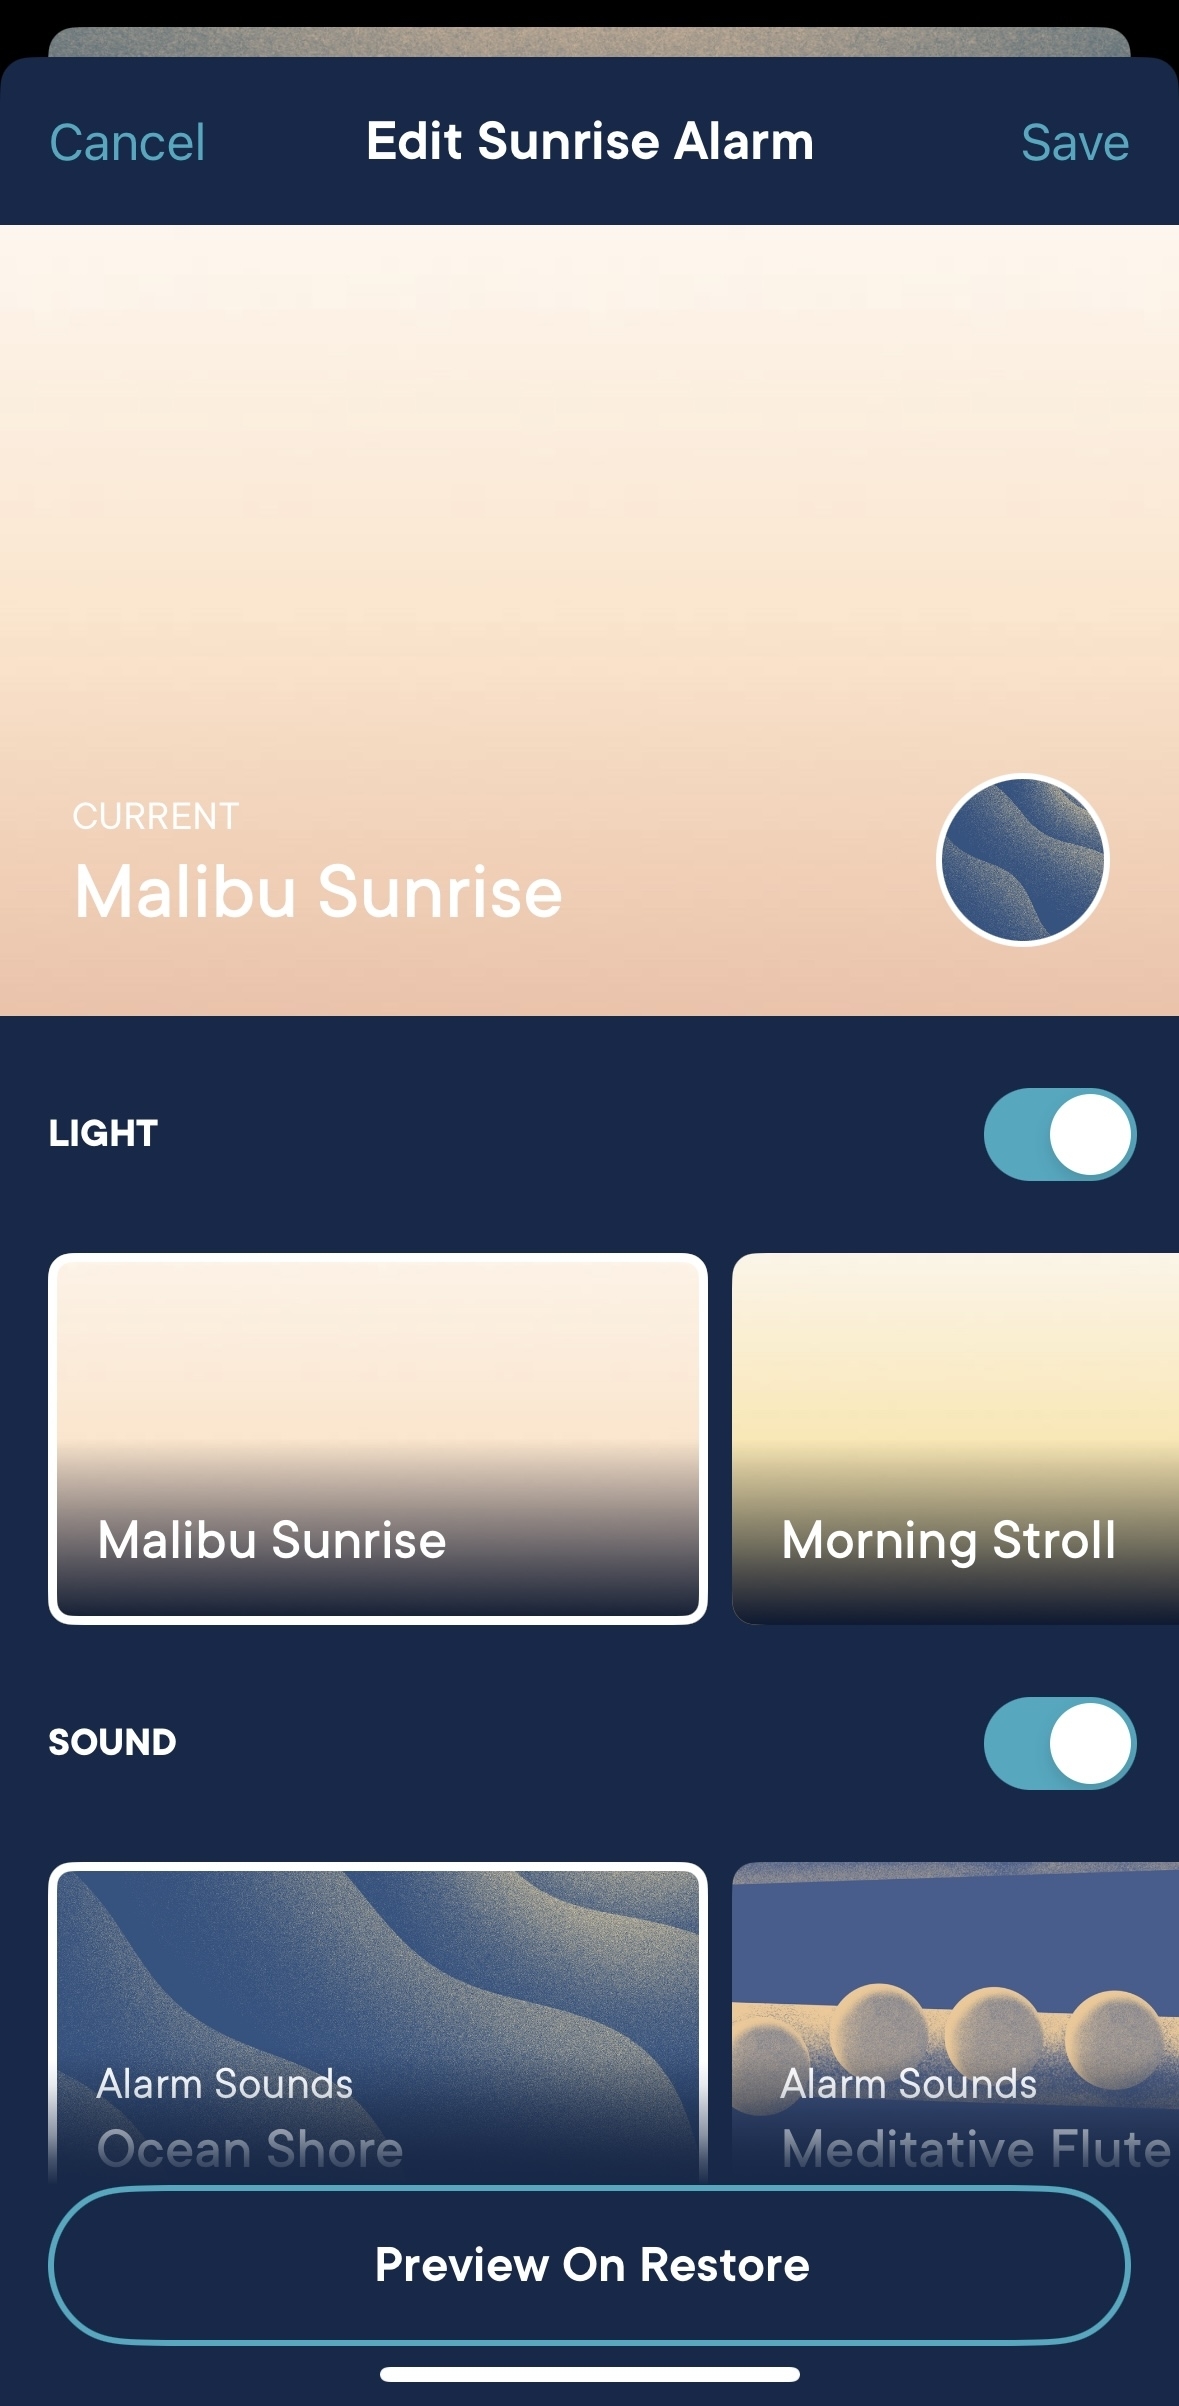 Phone screen displaying &quot;Edit Sunrise Alarm&quot; with toggle options for &quot;Malibu Sunrise&quot; and &quot;Morning Stroll&quot; under LIGHT and &quot;Ocean Shores&quot;, &quot;Alarm Sounds&quot;, and &quot;Meditative Flute&quot; under SOUND